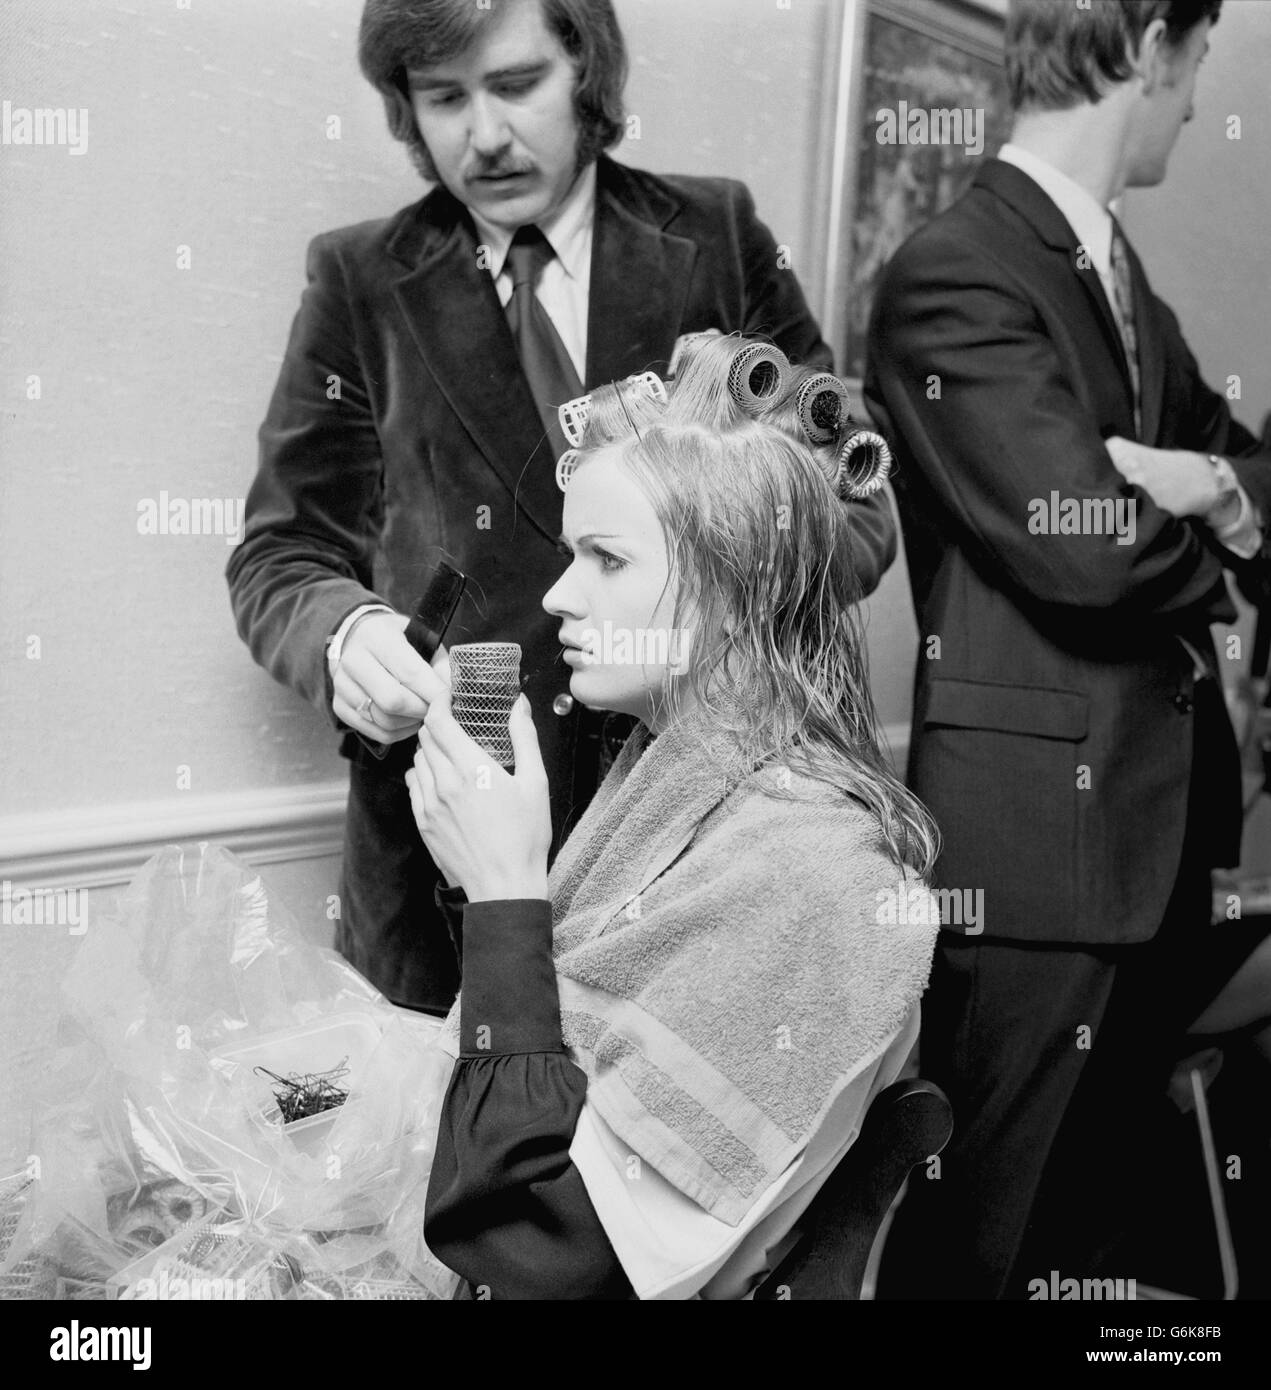 Crowned with rollers is Miss United Kingdom, Marilyn Ann Ward, 22, at a West End hairdressing salon where the Miss World contestants attended in preparation for the final. Stock Photo